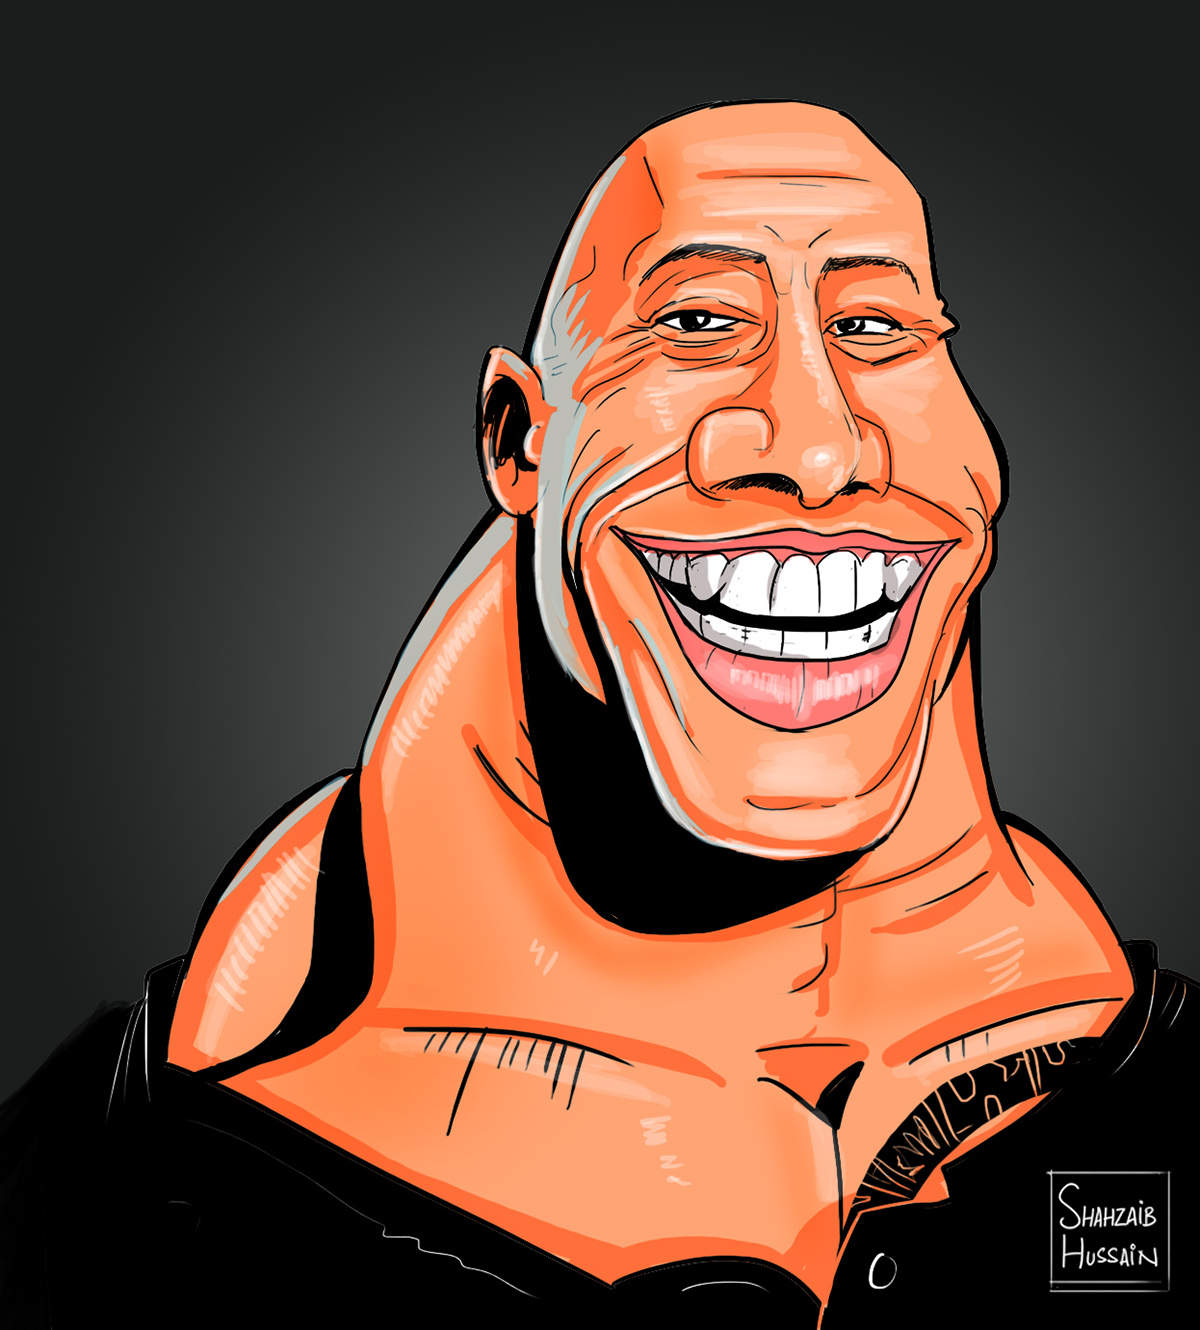 caricatures drawings portraits artwork design Cartoons doodling illustrations The Rock funny faces